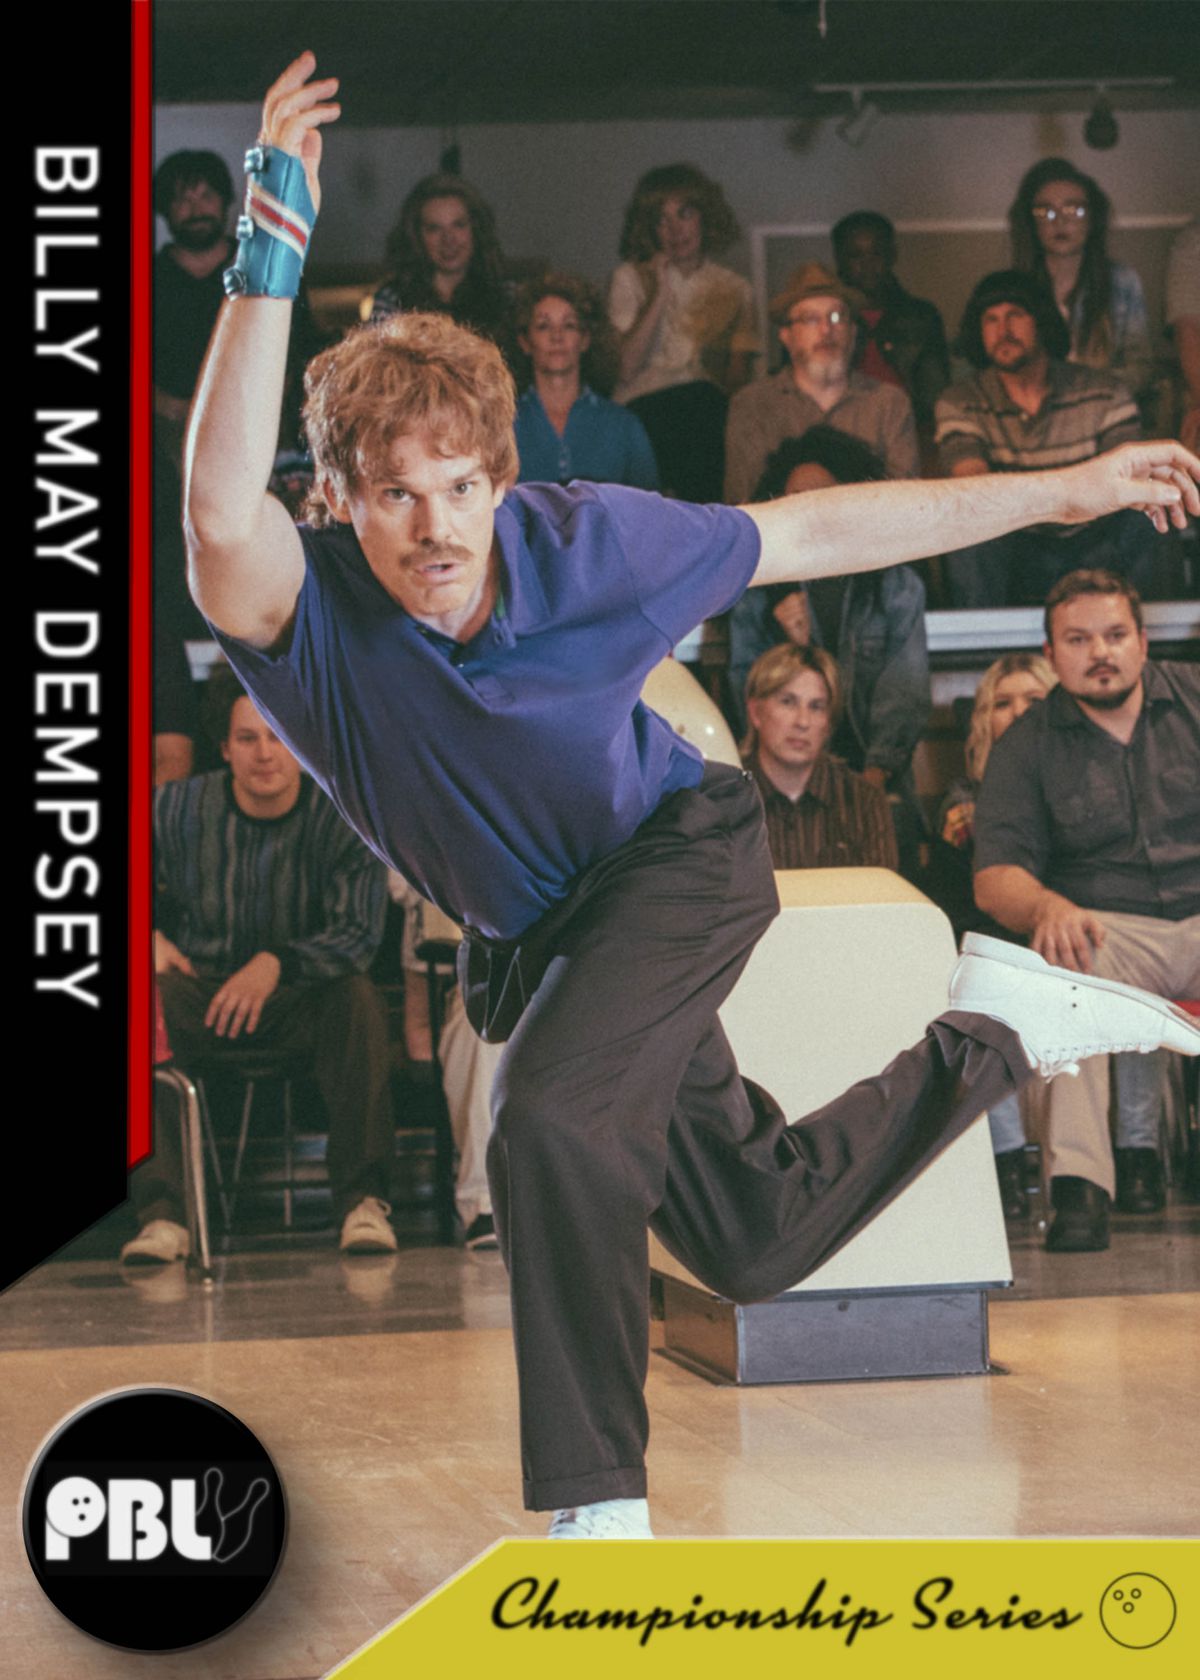 Billy May Dempsey’s Pro Bowling League Championship Series poster.